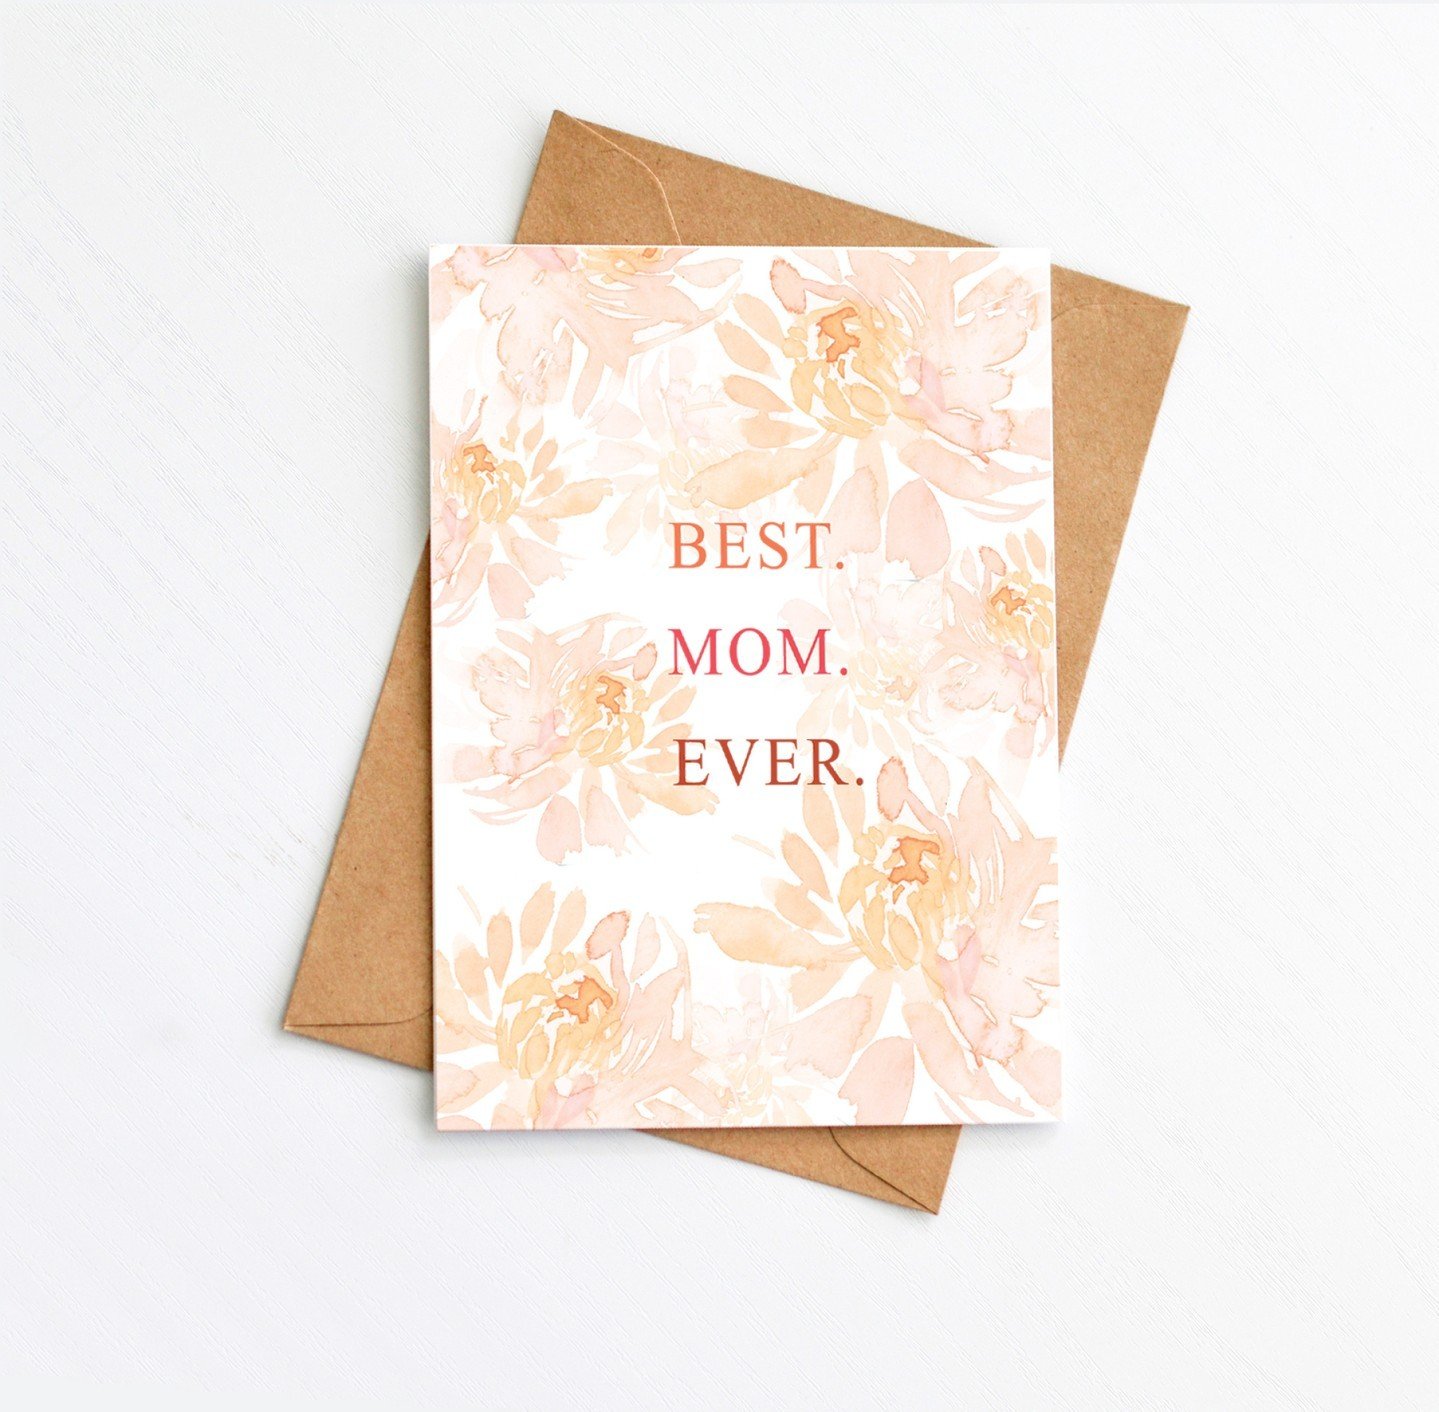 Best. Mom. Aunt. Sister. Grandma. Friend. Caregiver. Dog Momma. Woman. Ever. They deserve a lovely card with actual handwritten words on it!

You have TWO opportunities to shop for or with MOM this weekend!

Saturday @headsortailsmarket and Sunday @w